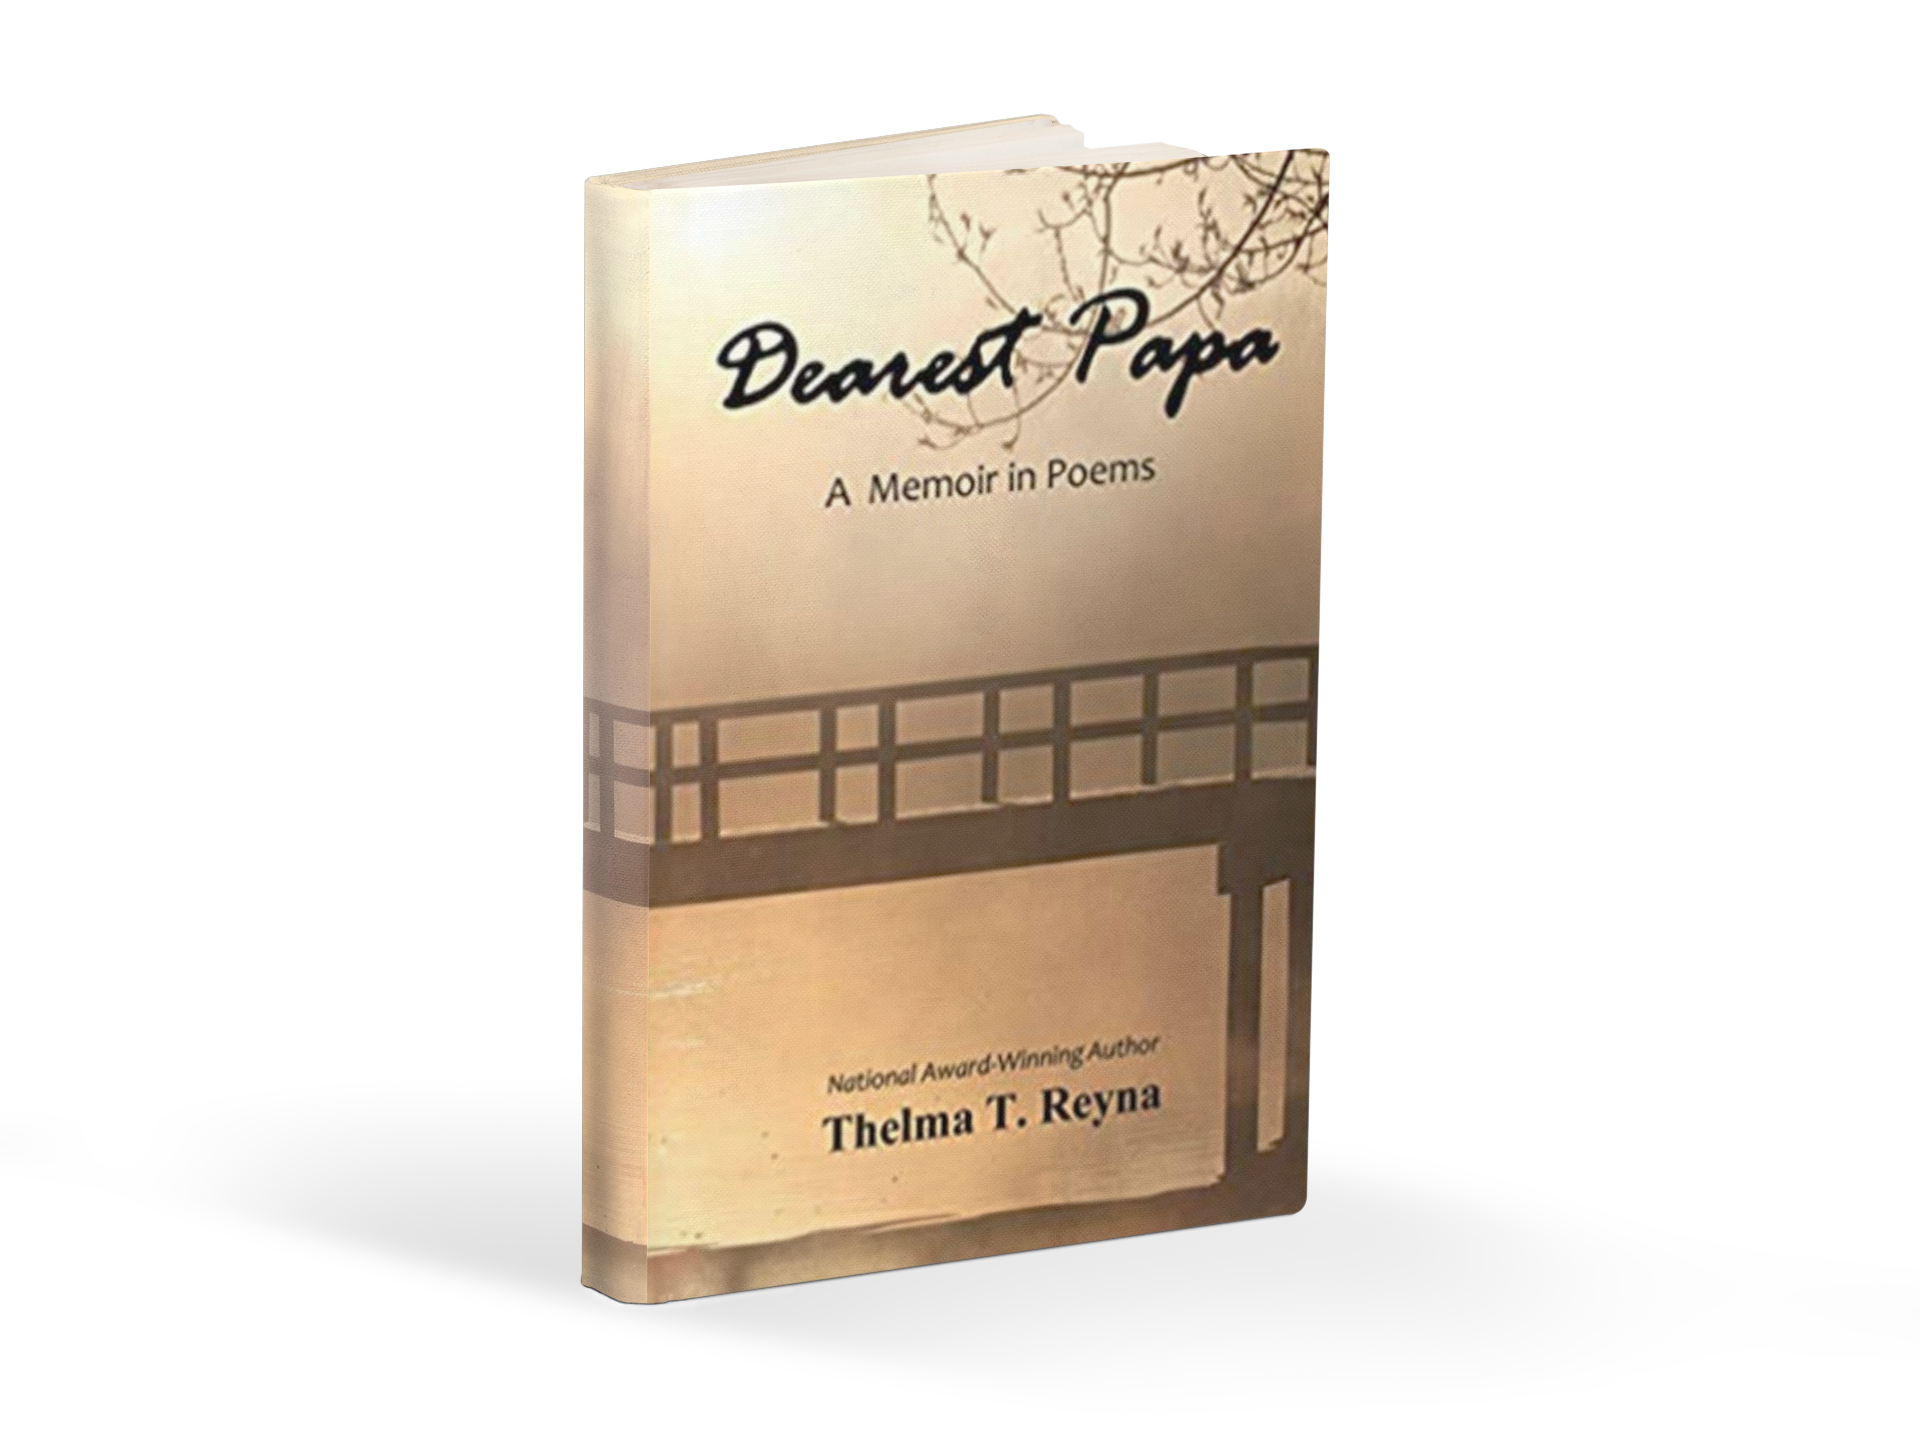 Thelma T. Reyna’s Award-Winning Book, Dearest Papa: A Memoir in Poems, is a Heartfelt Journey of Healing From Loss and Grief